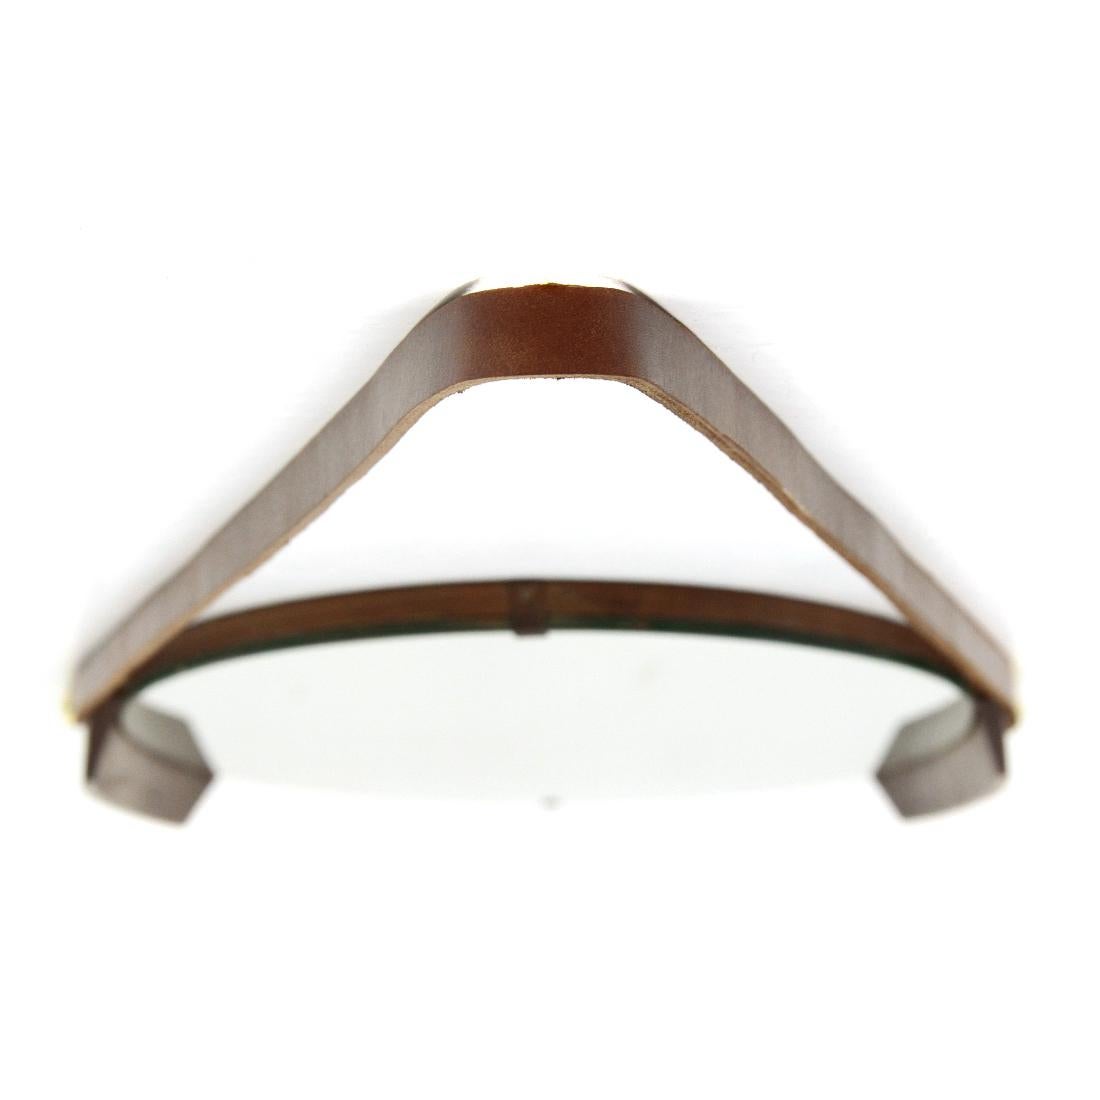 Mid-20th Century Oval Mirror with Teak Edges, 1960s For Sale